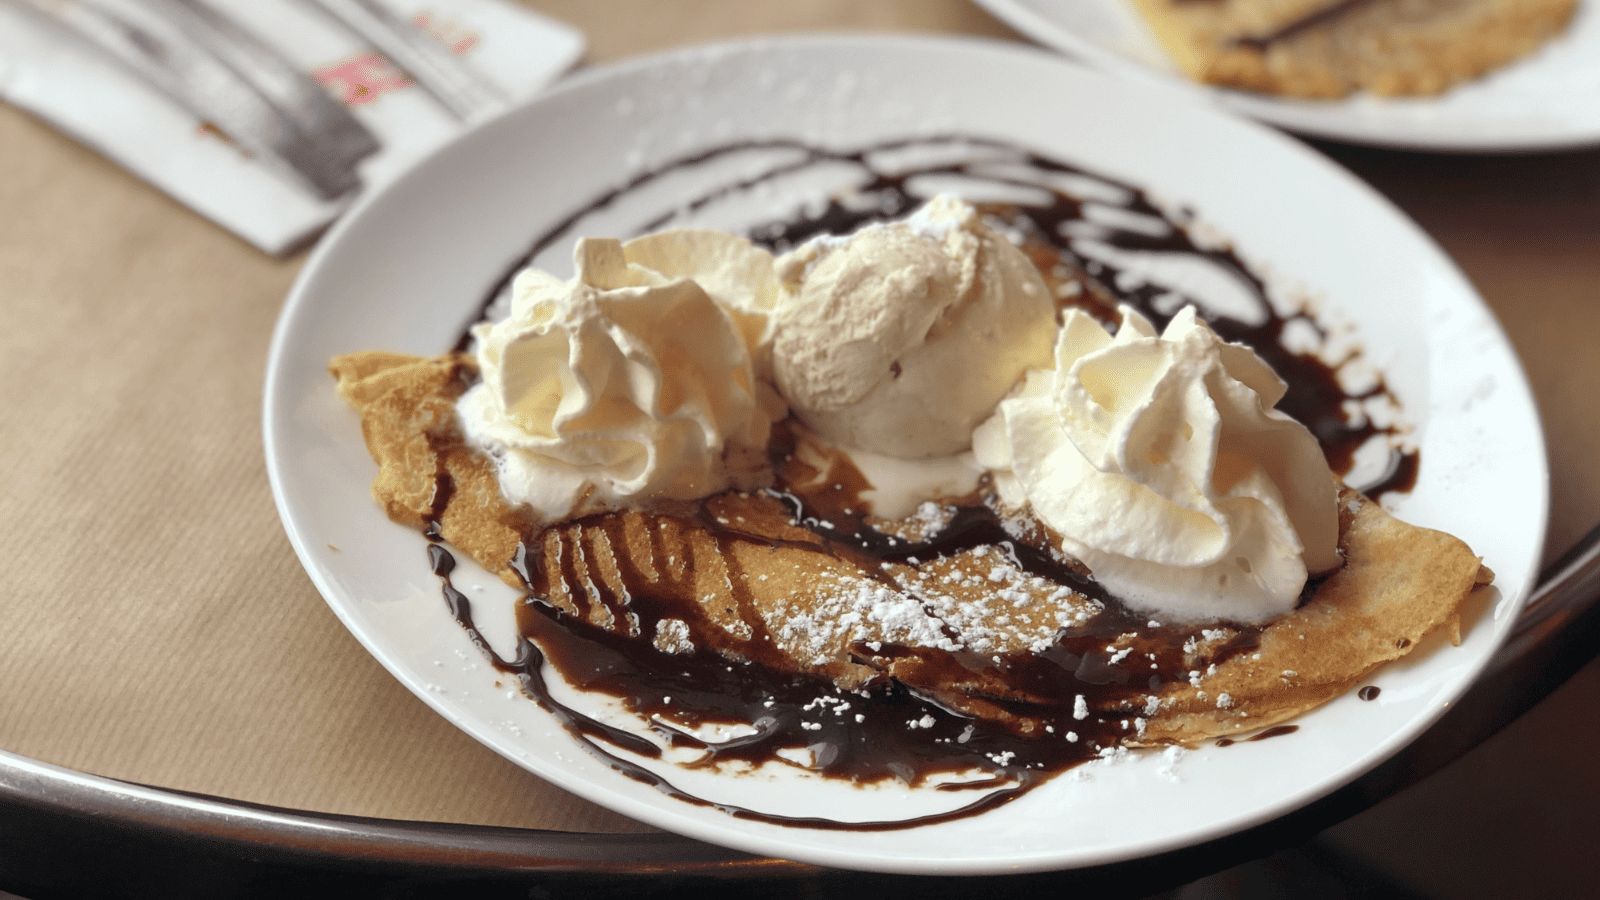 Crepes with ice cream and chocolate sauce